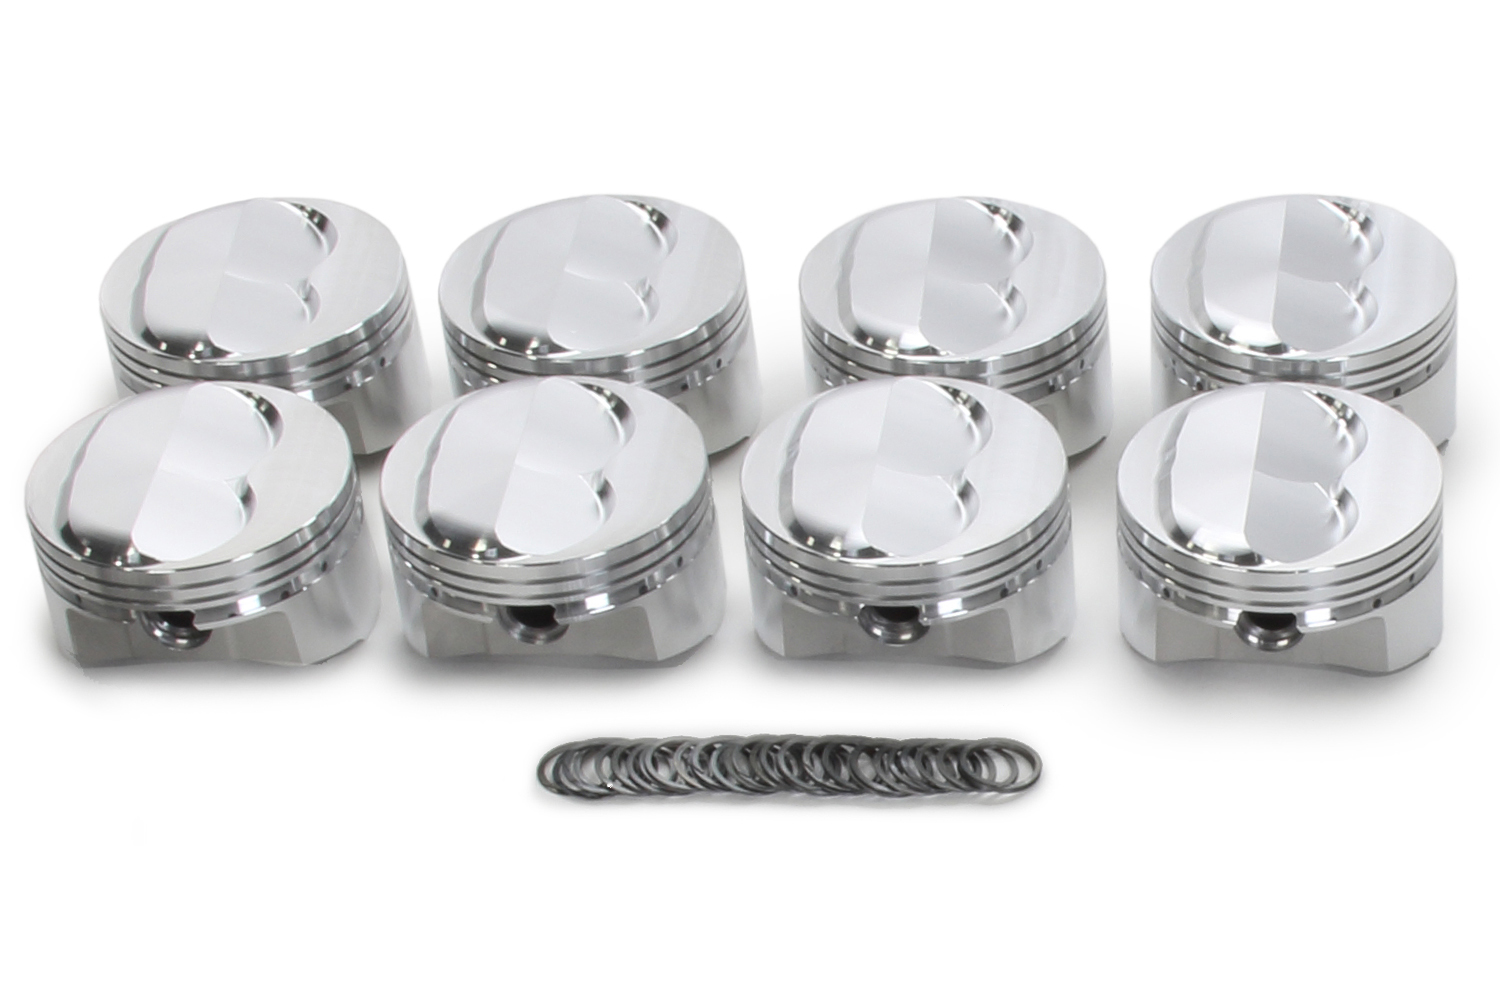 SRP Pistons 142021 Piston, 400 Dome, Forged, 4.155 in Bore, 1/16 x 1/16 x 3/16 in Ring Grooves, Plus 4.00 cc, Small Block Chevy, Set of 8